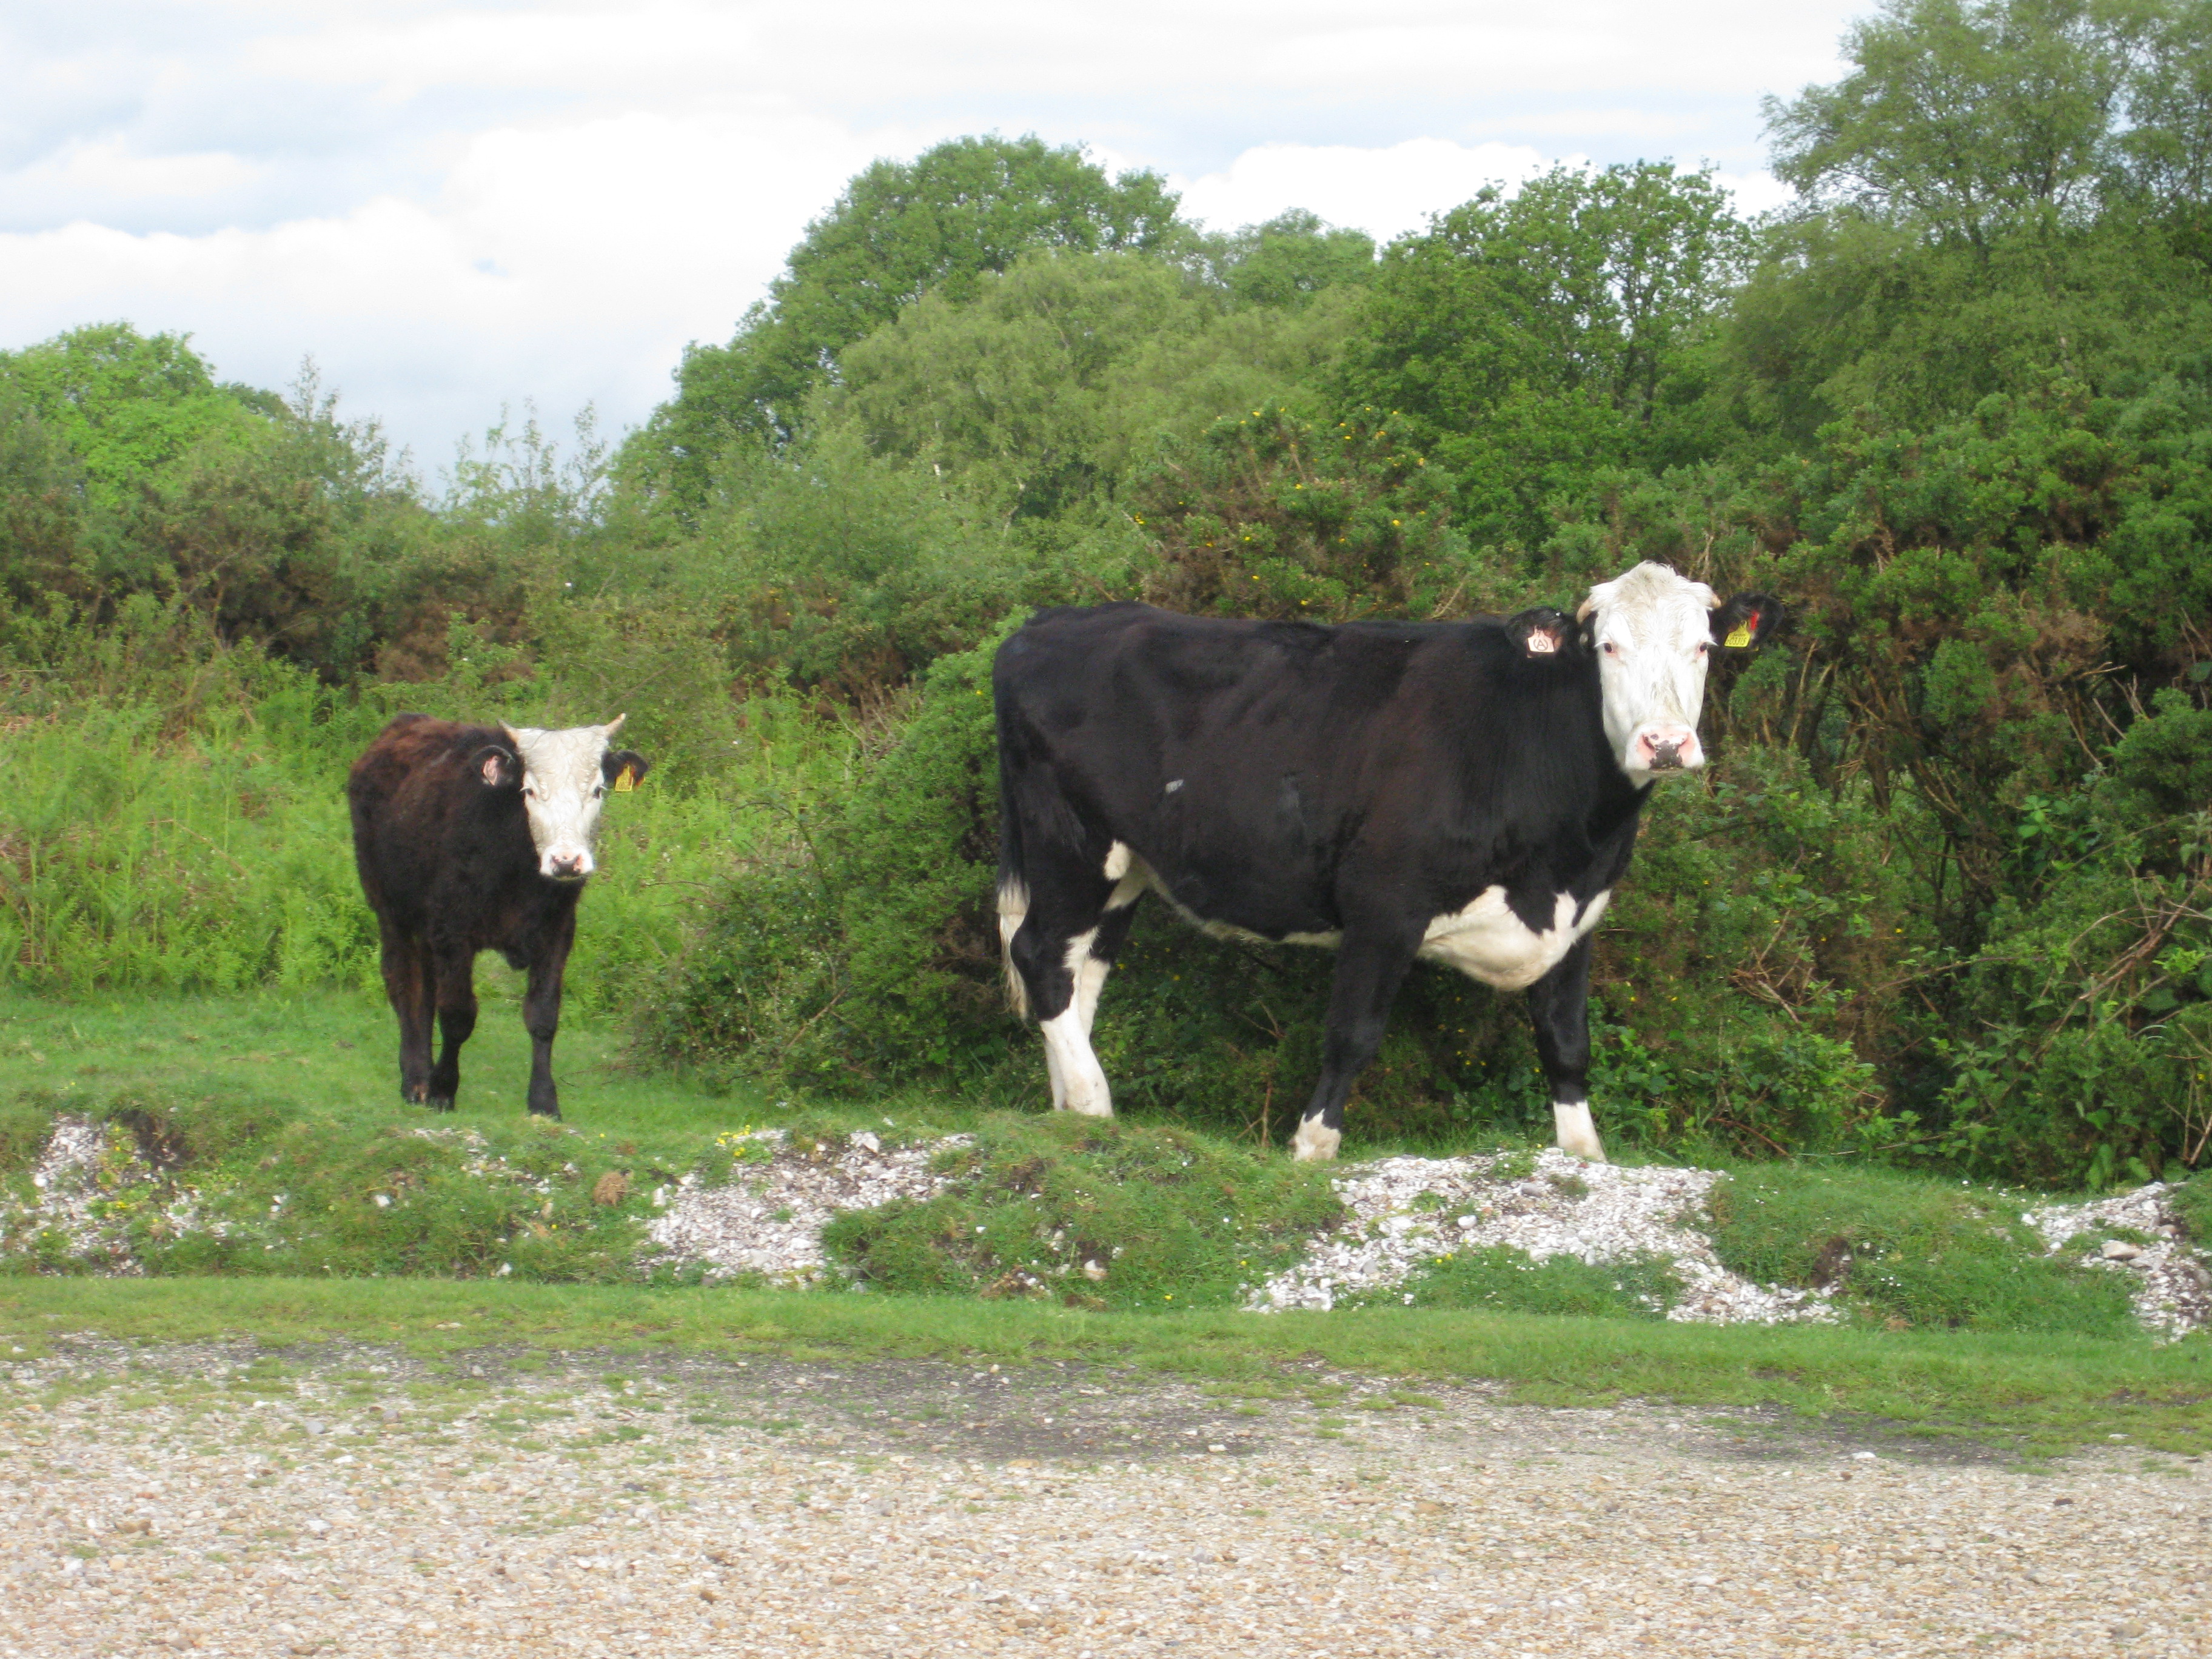 Cows are also commonable animals and roam freely on the New Forest.